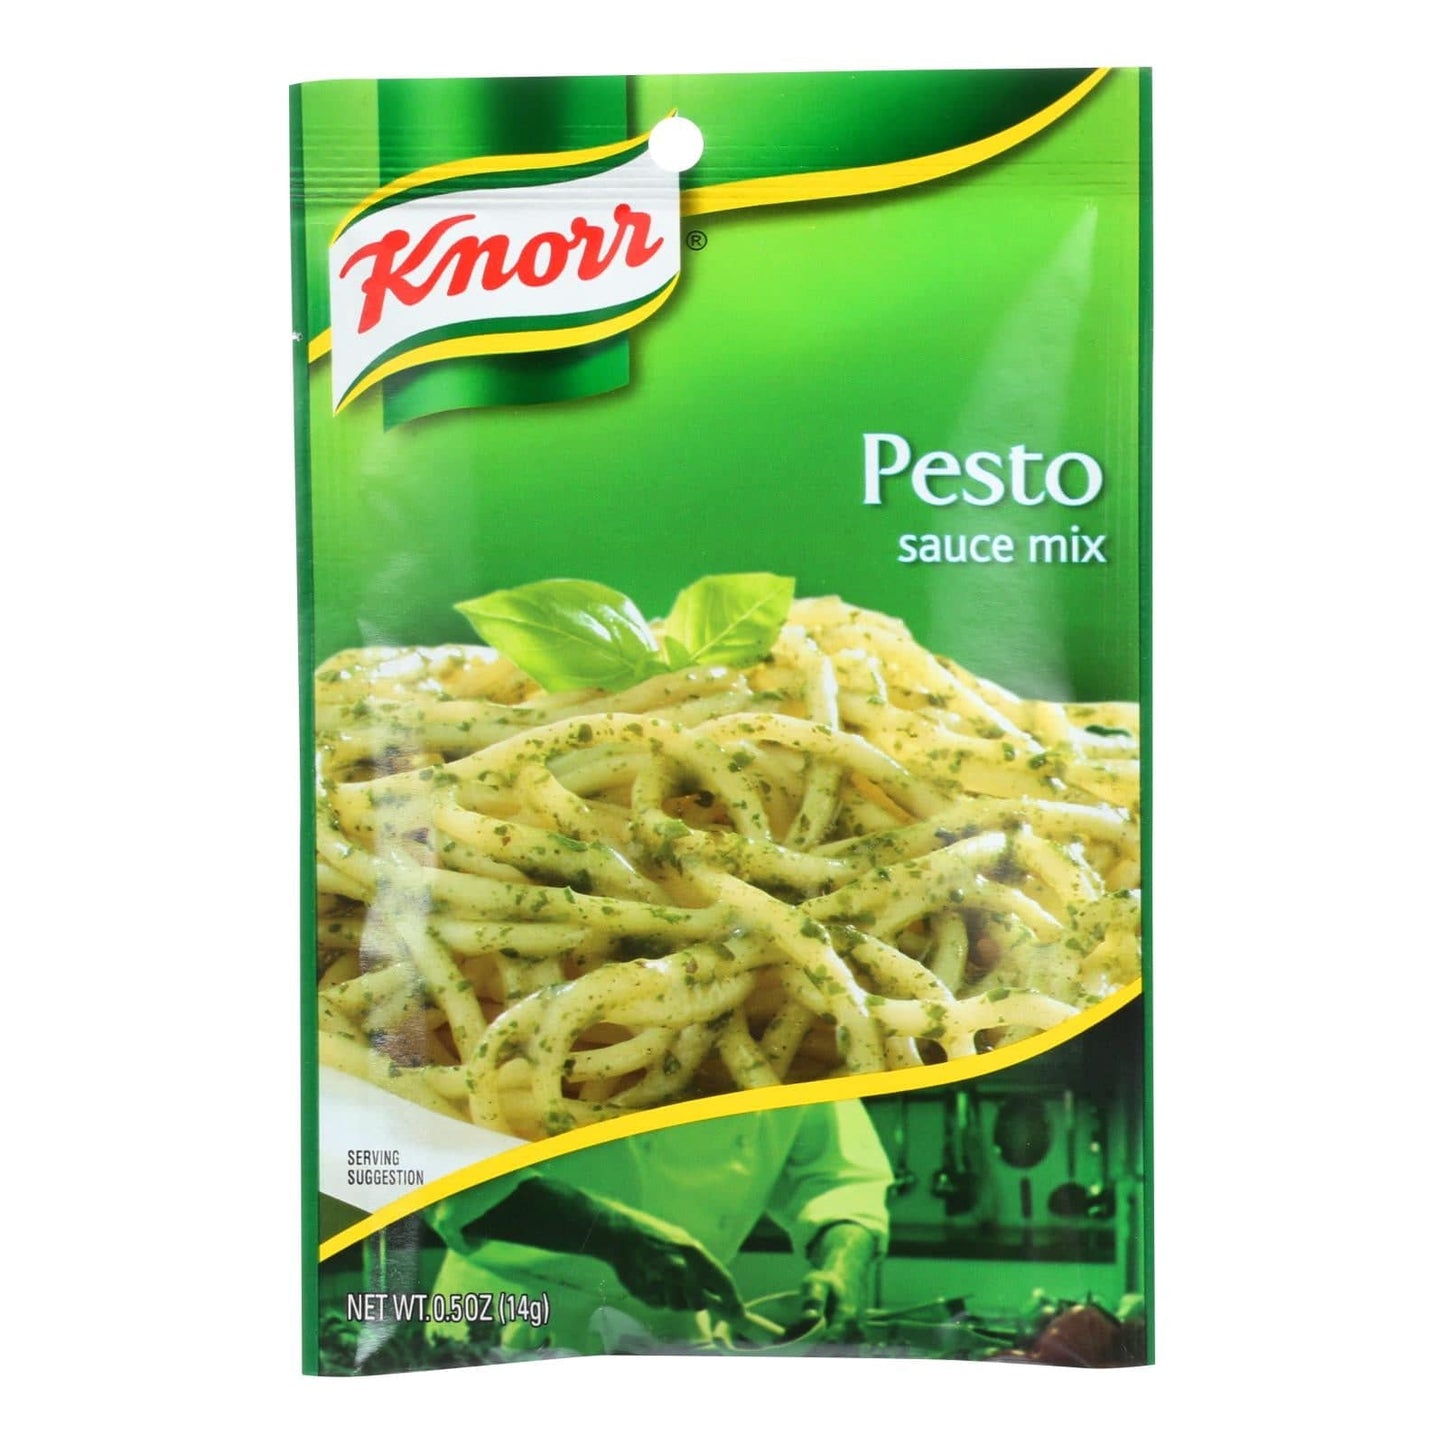 Buy Knorr Sauce Mix - Pesto - .5 Oz - Case Of 12  at OnlyNaturals.us